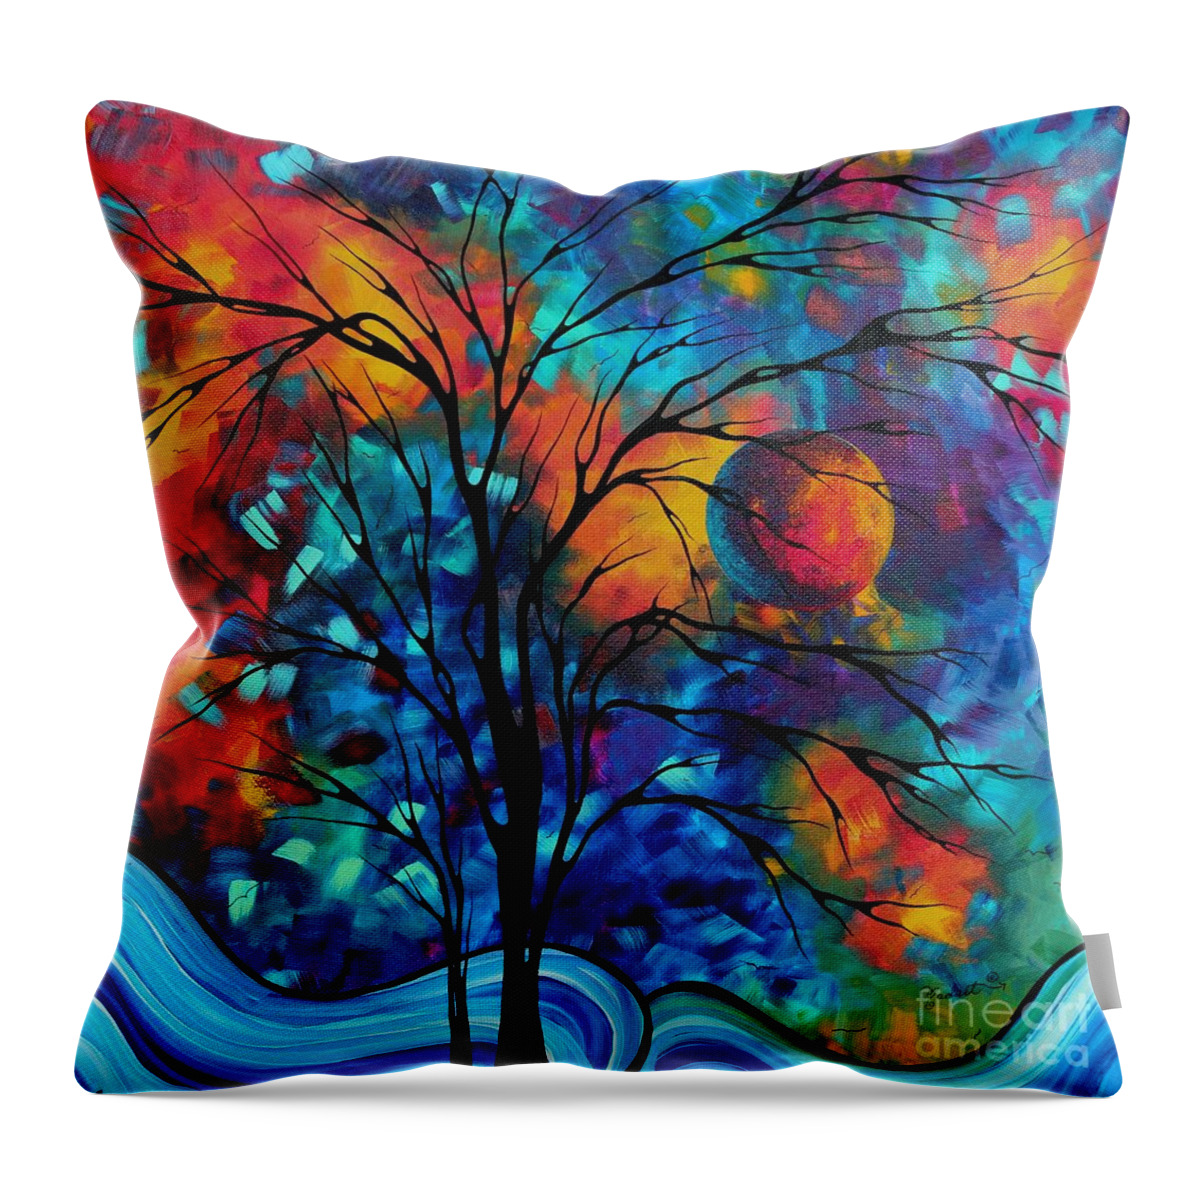 Abstract Throw Pillow featuring the painting Abstract Art Landscape Tree Bold Colorful Painting A SECRET PLACE by MADART by Megan Aroon